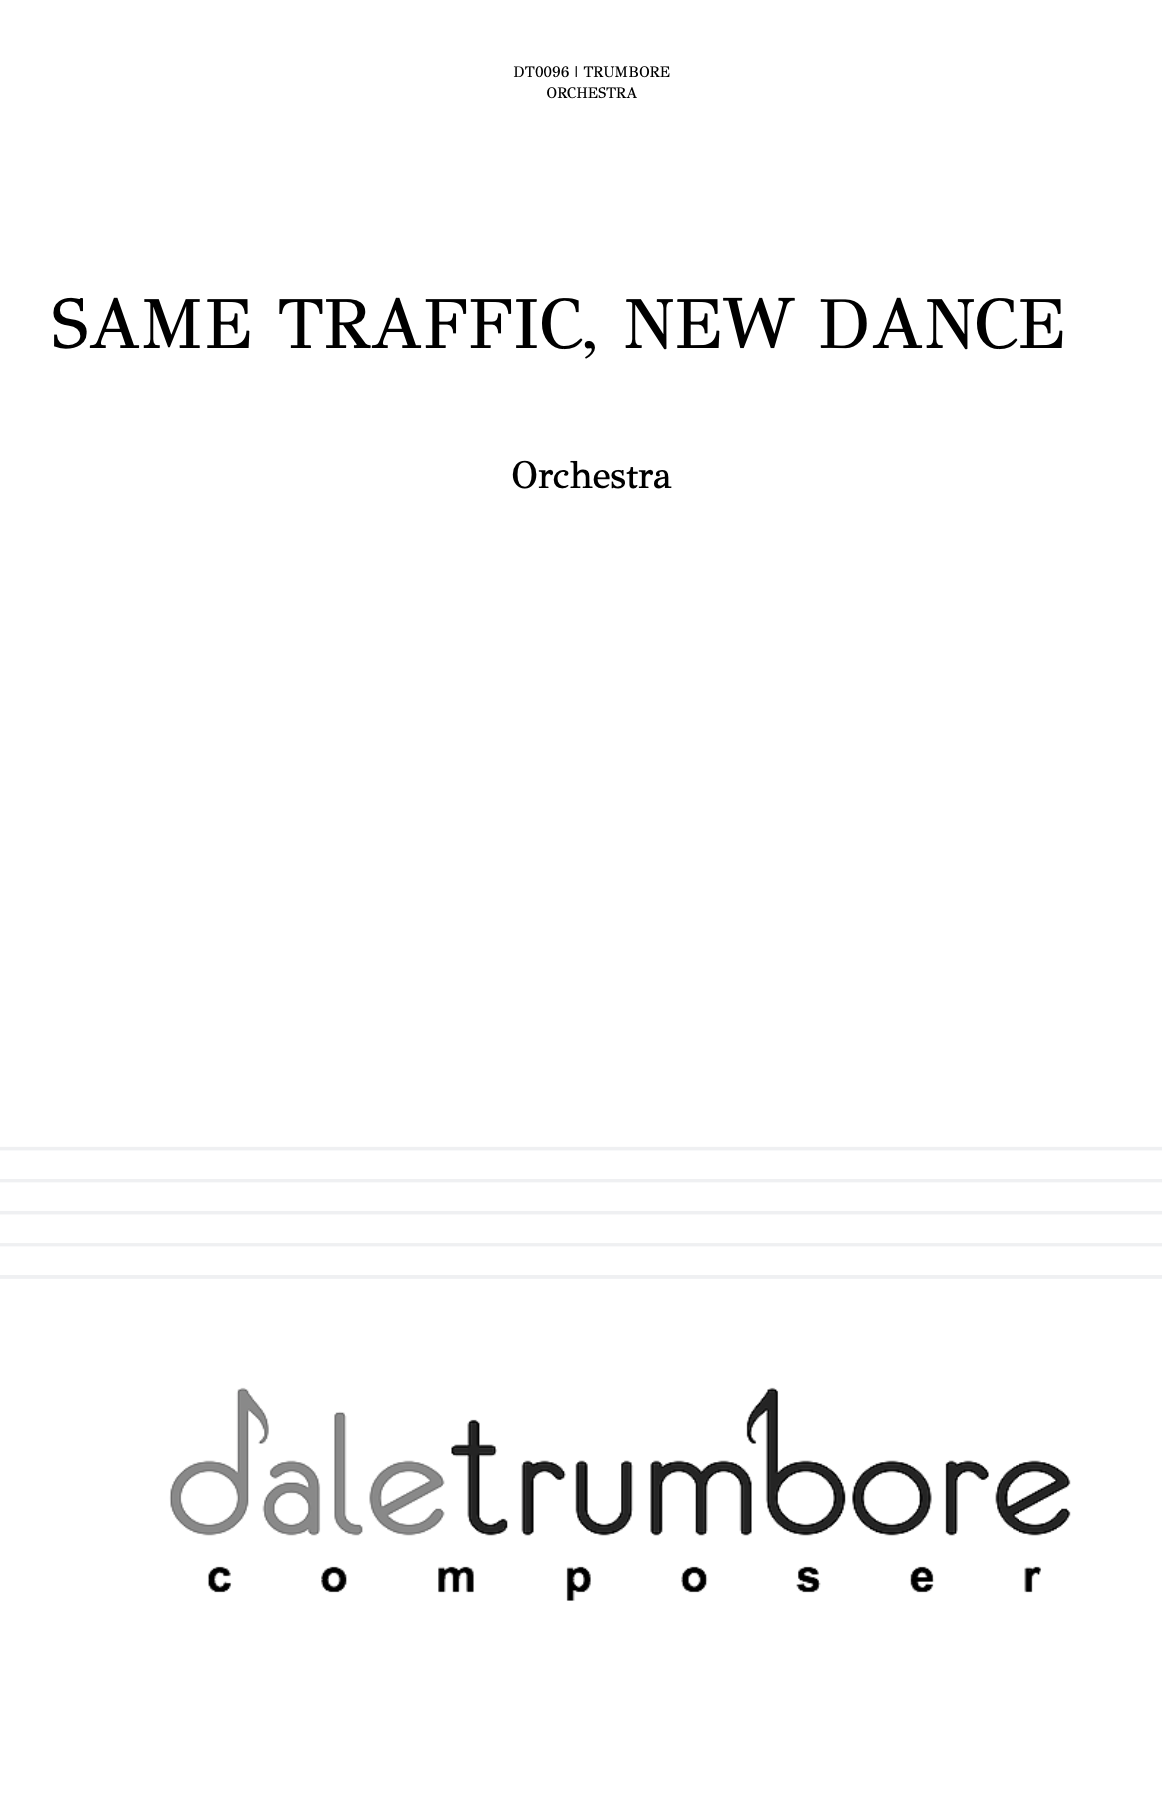 Same Traffic, New Dance (Score Only) by Dale Trumbore